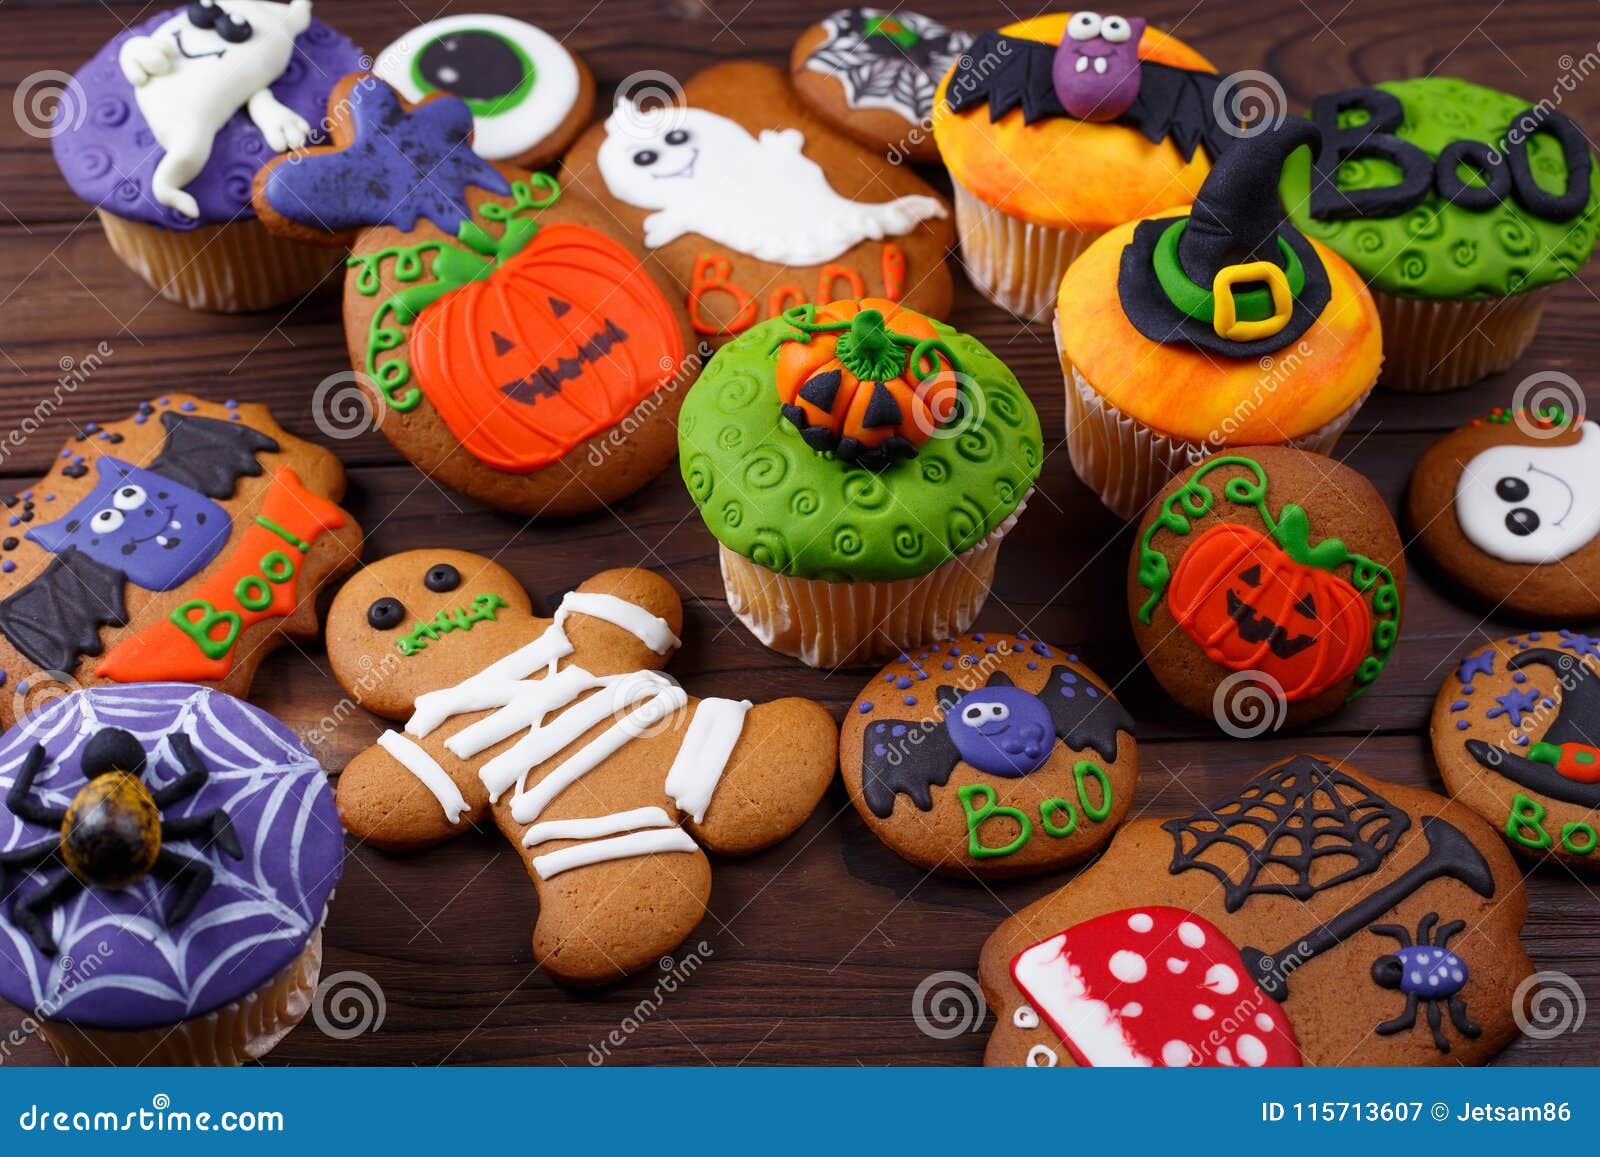 halloween homemade gingerbread cookies and cupcakes background.